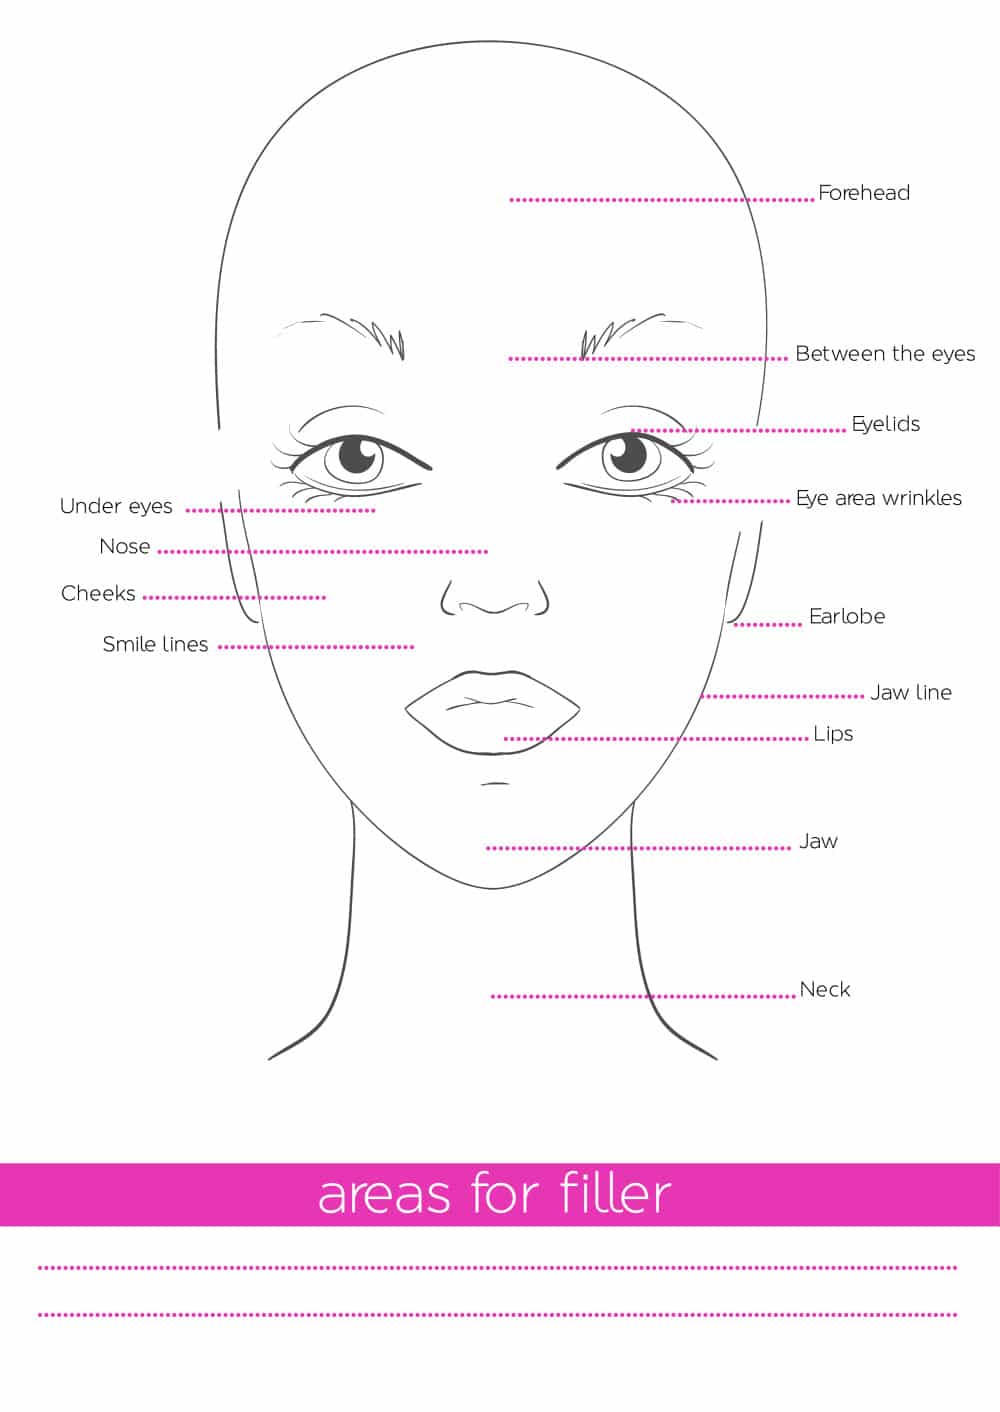 Facial Fillers Areas Learn from Smooth Solutions Medical Aesthetics in New York e1446751704135